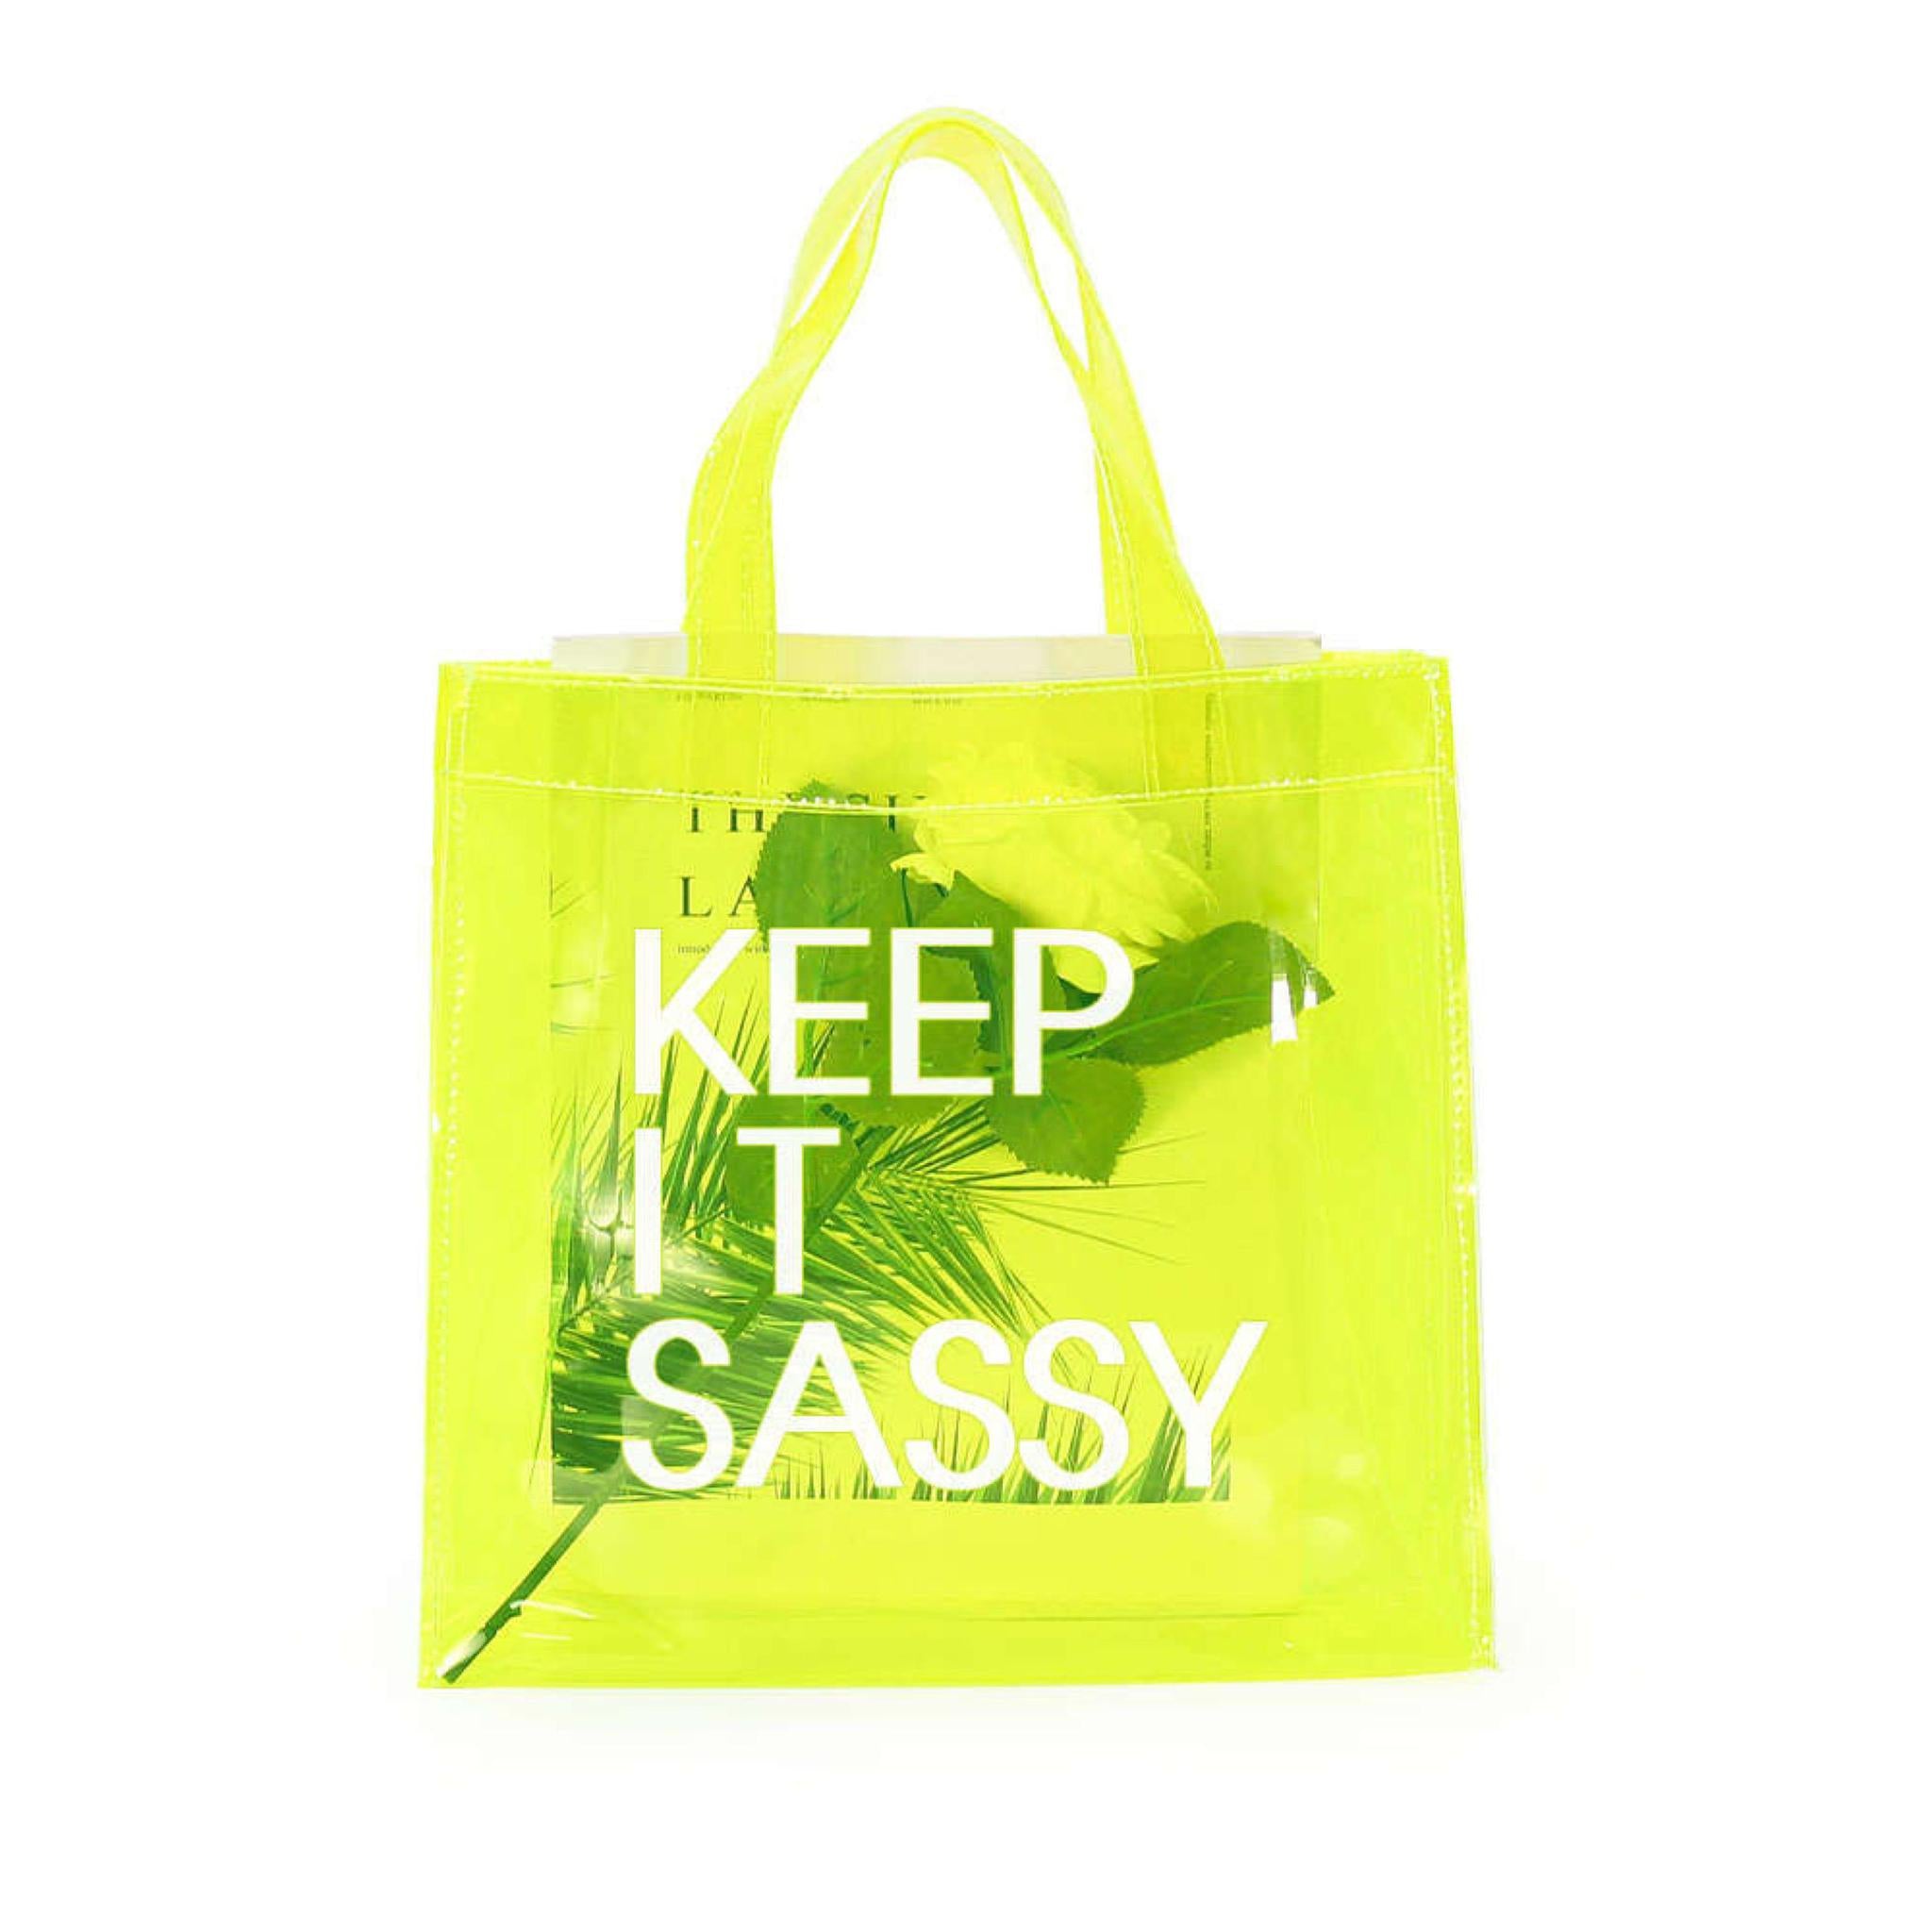 Statement Jelly Tote